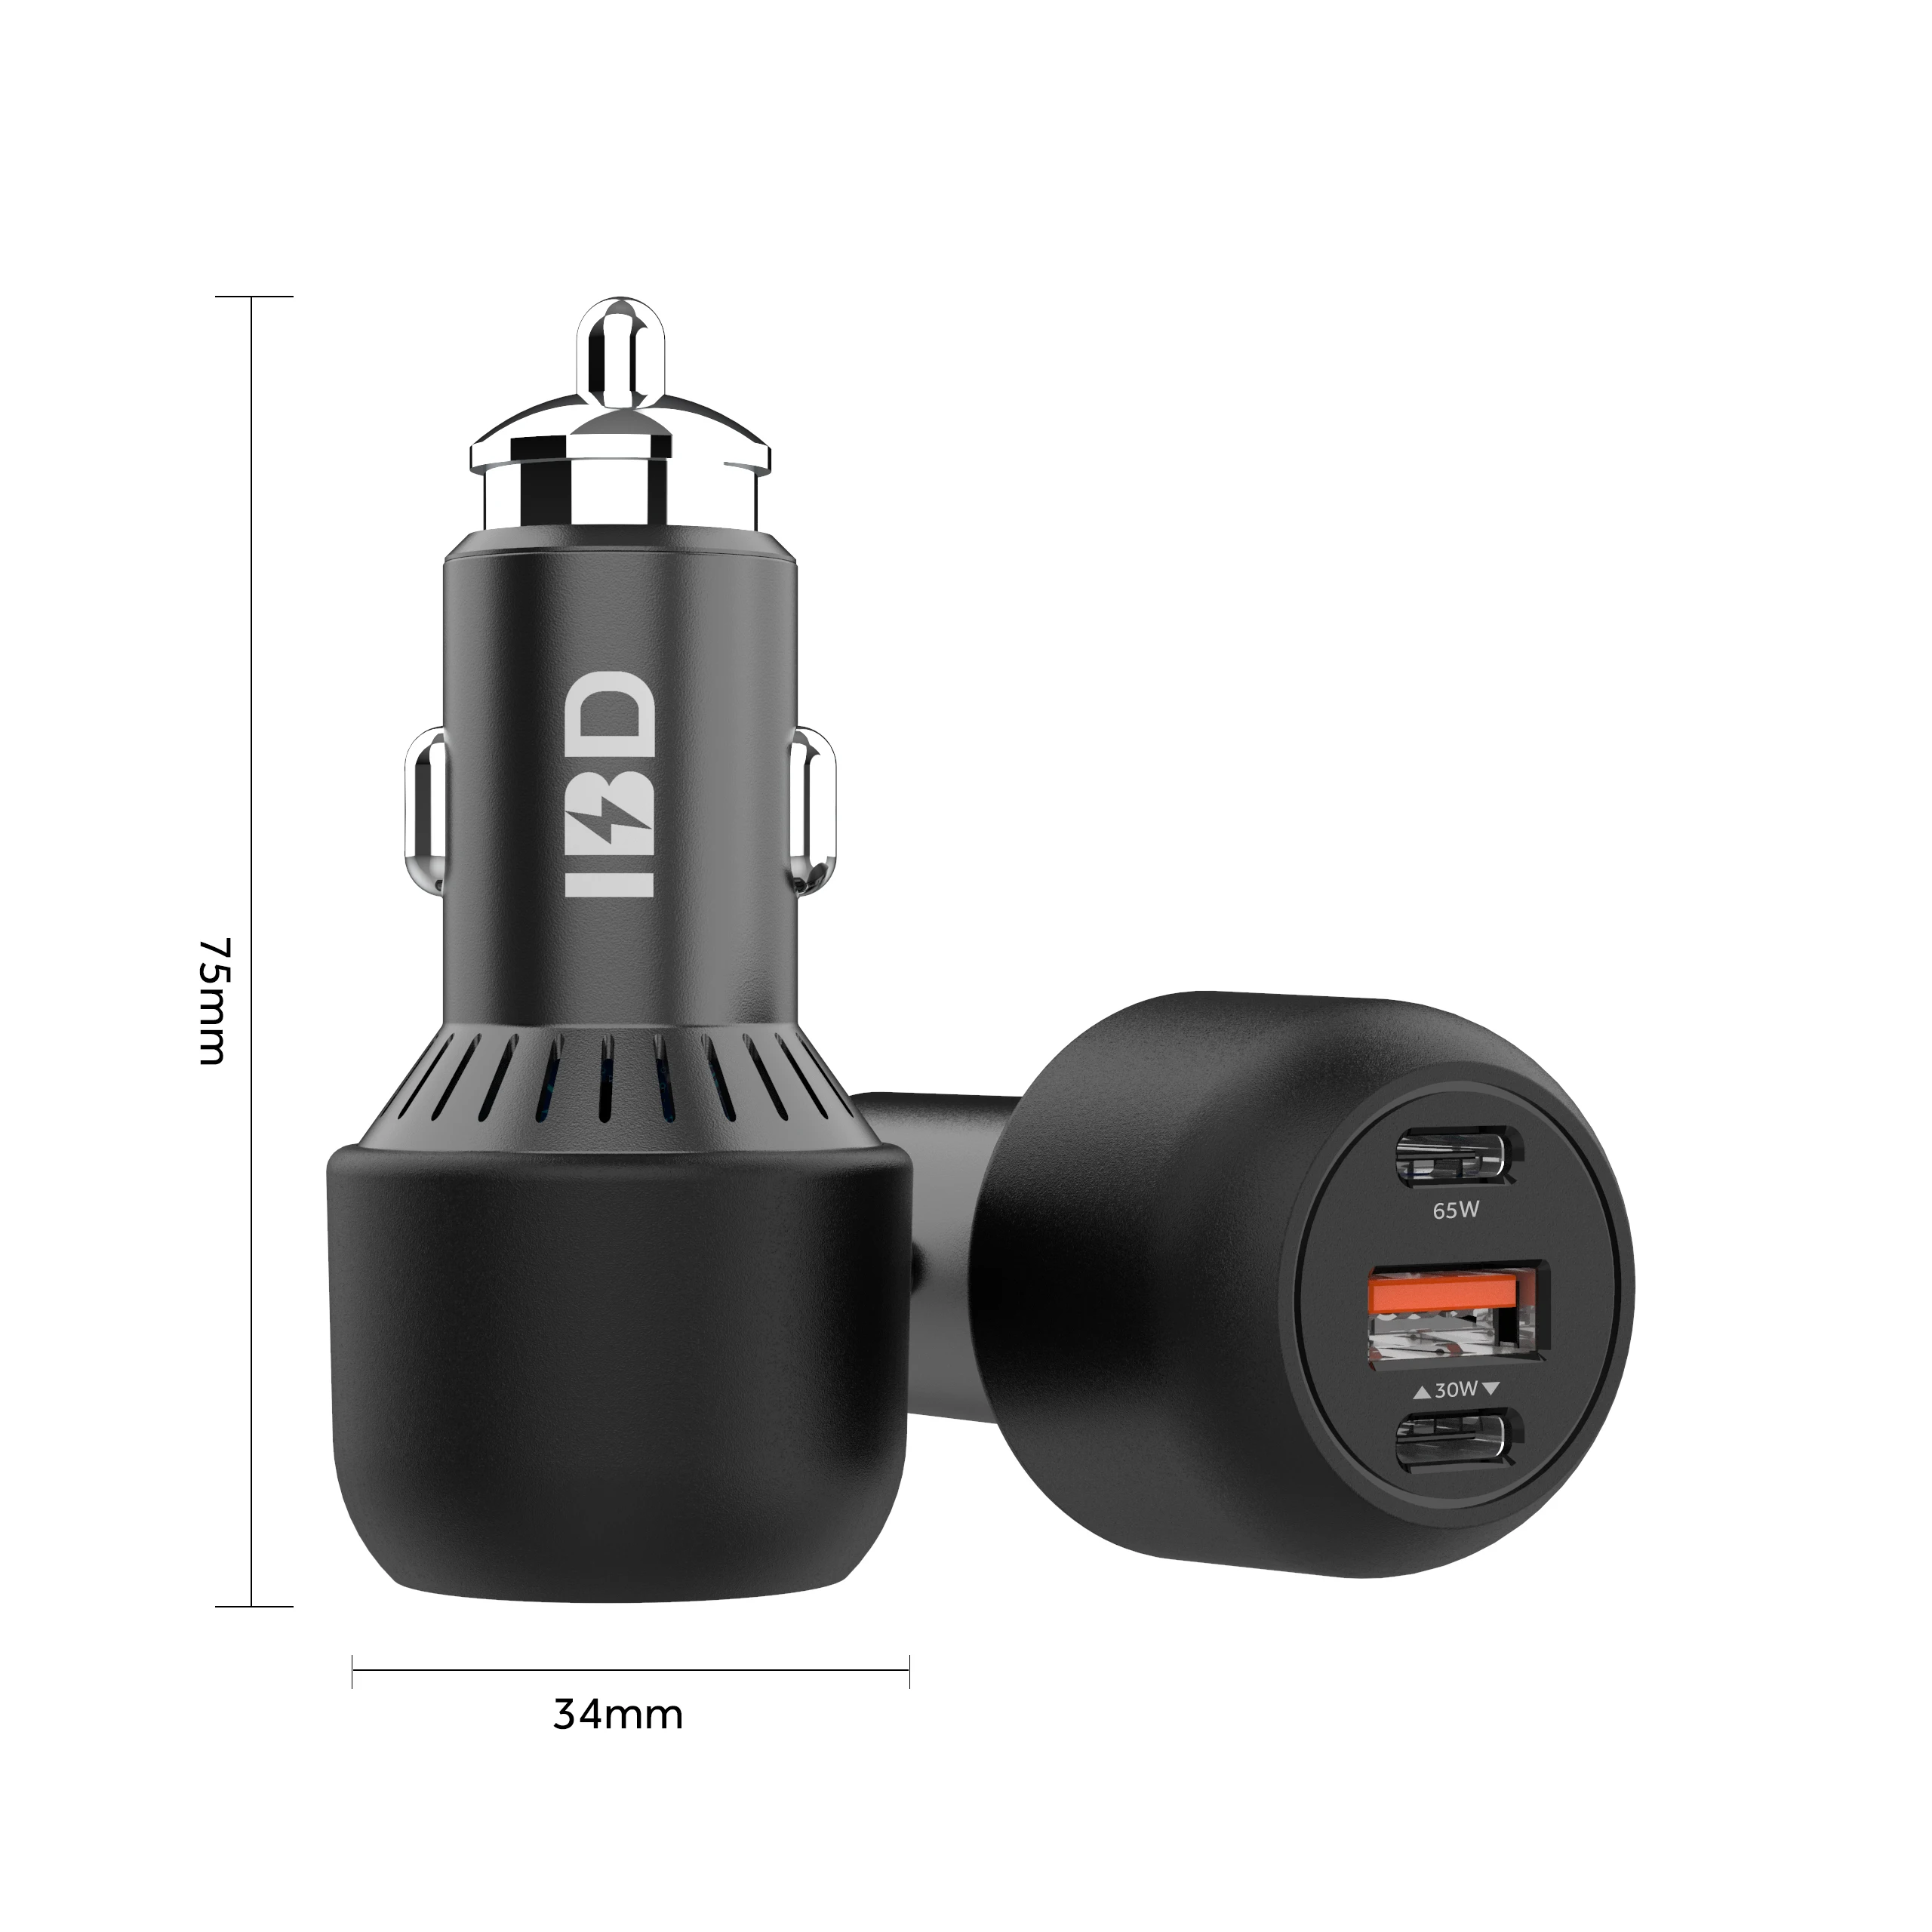 

IBD 65W type-c mini qc 3.0 usb c car charger fast charging phone usb cellphone adapter pd mobile in-car phone charger car, Black